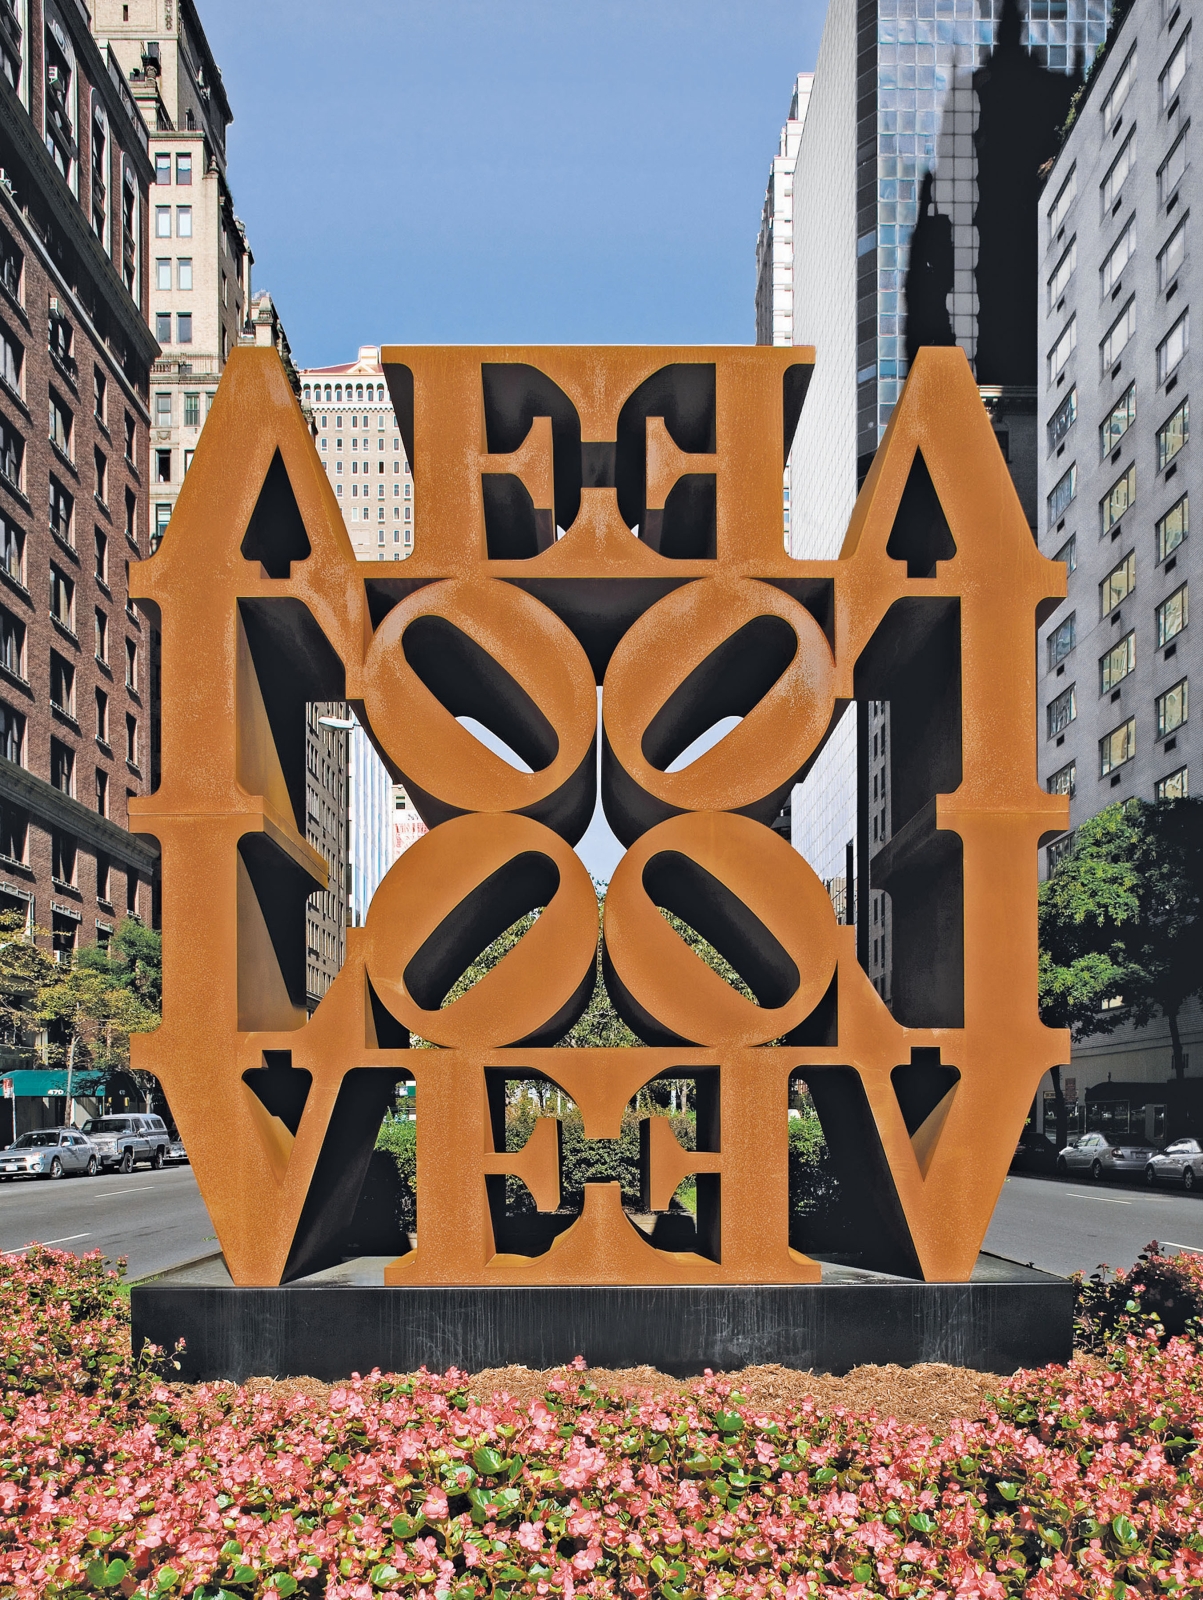 As part of the program Art in the Parks in New York, Indiana&rsquo;s LOVE Wall (1966) is installed at Park Avenue and Fifty-Seventh Street. Photo: Paul Kasmin. Image courtesy of Kasmin Gallery.